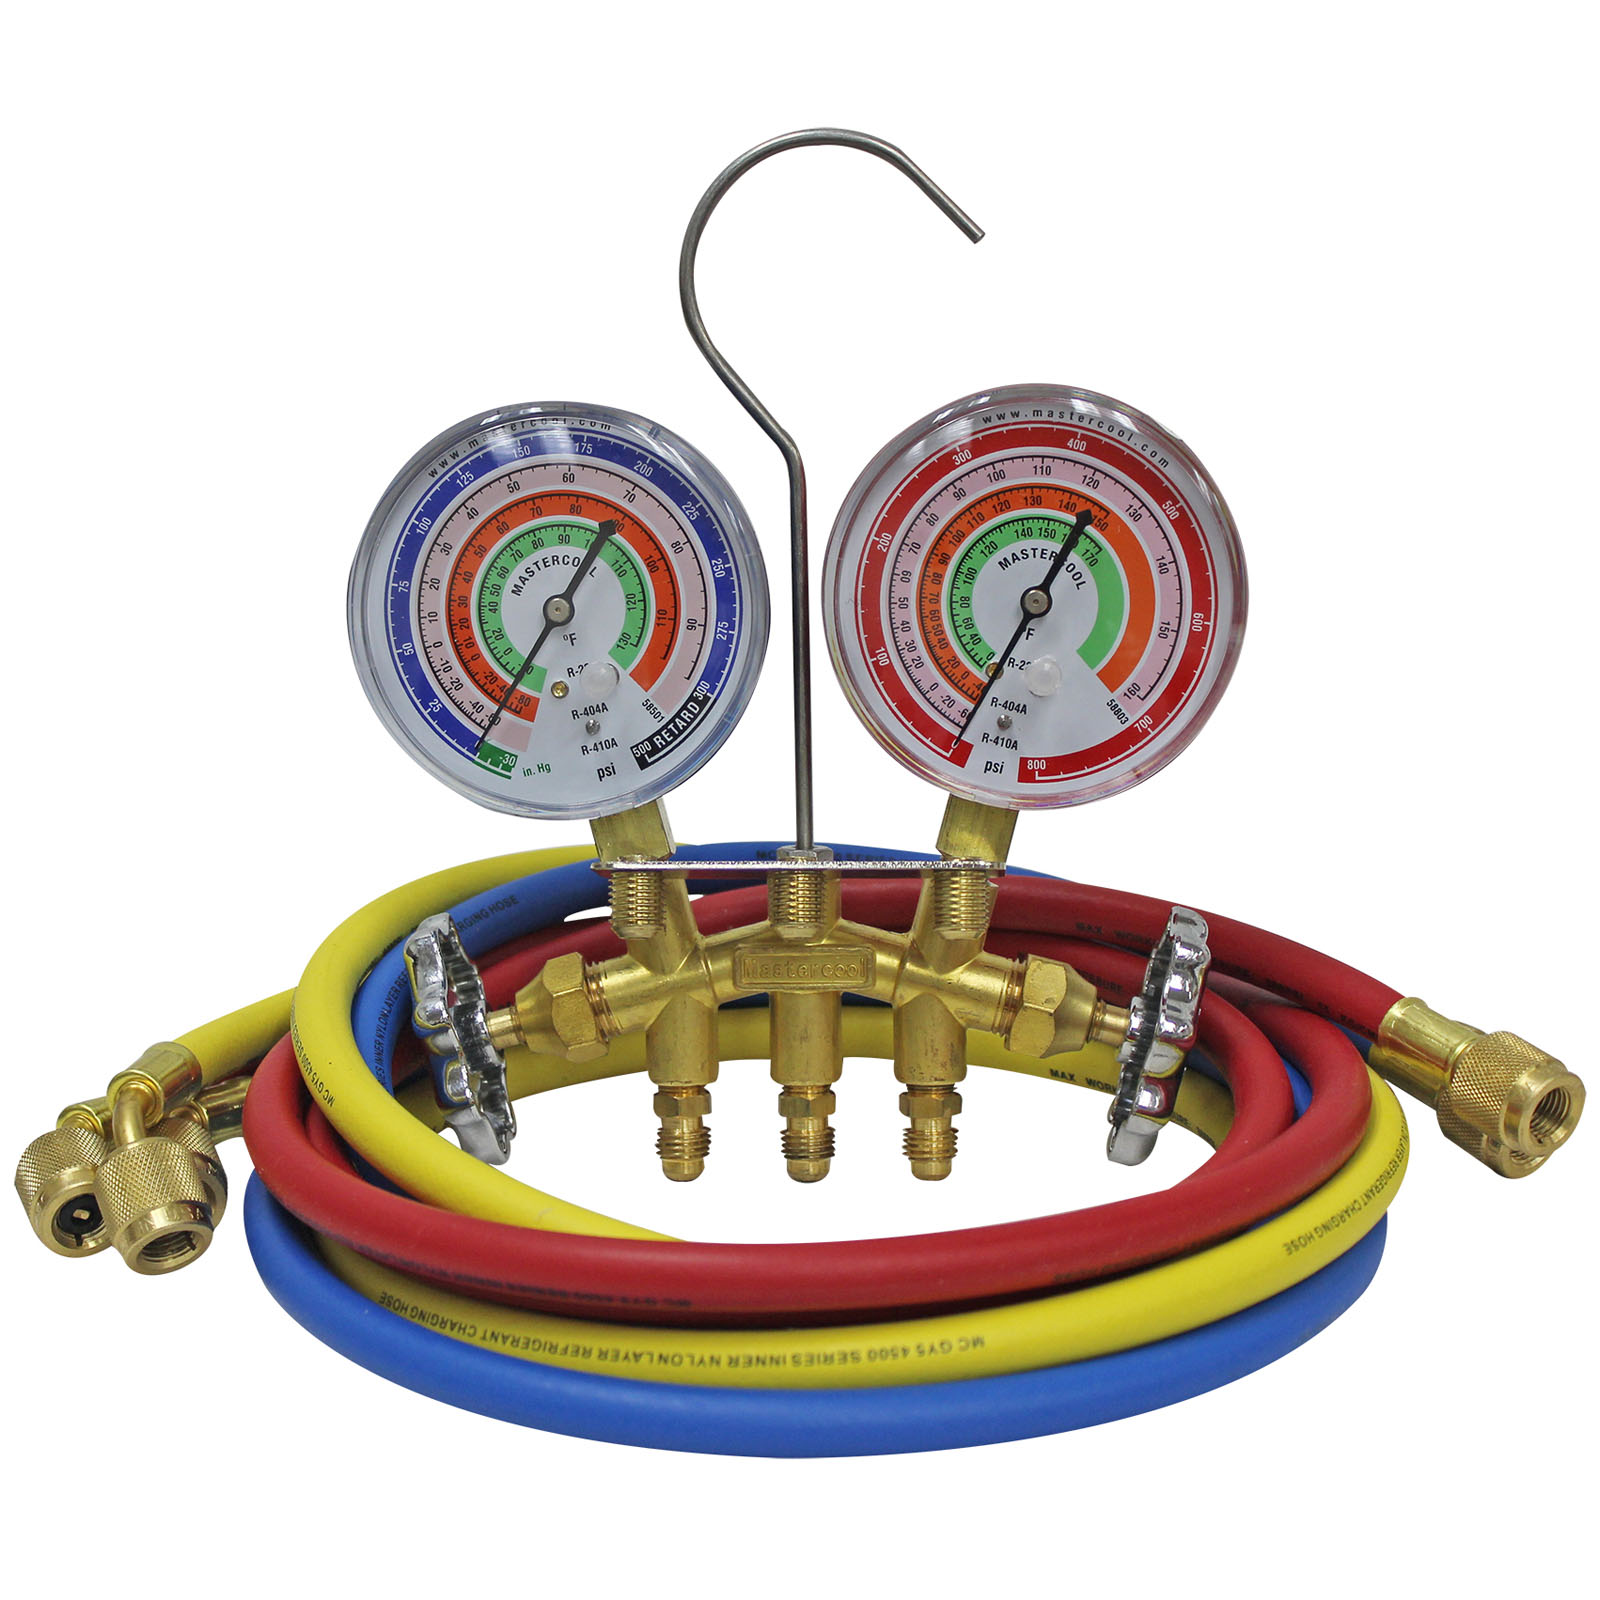 2 Way AC Diagnostic Manifold Gauge Set Multicolor, 1X Refrigerant Meter Tool kit Precision Measure Pressure in Refrigeration Equipment for R134a r134 R410A R404A R22 w/Hoses Coupler Adapters 